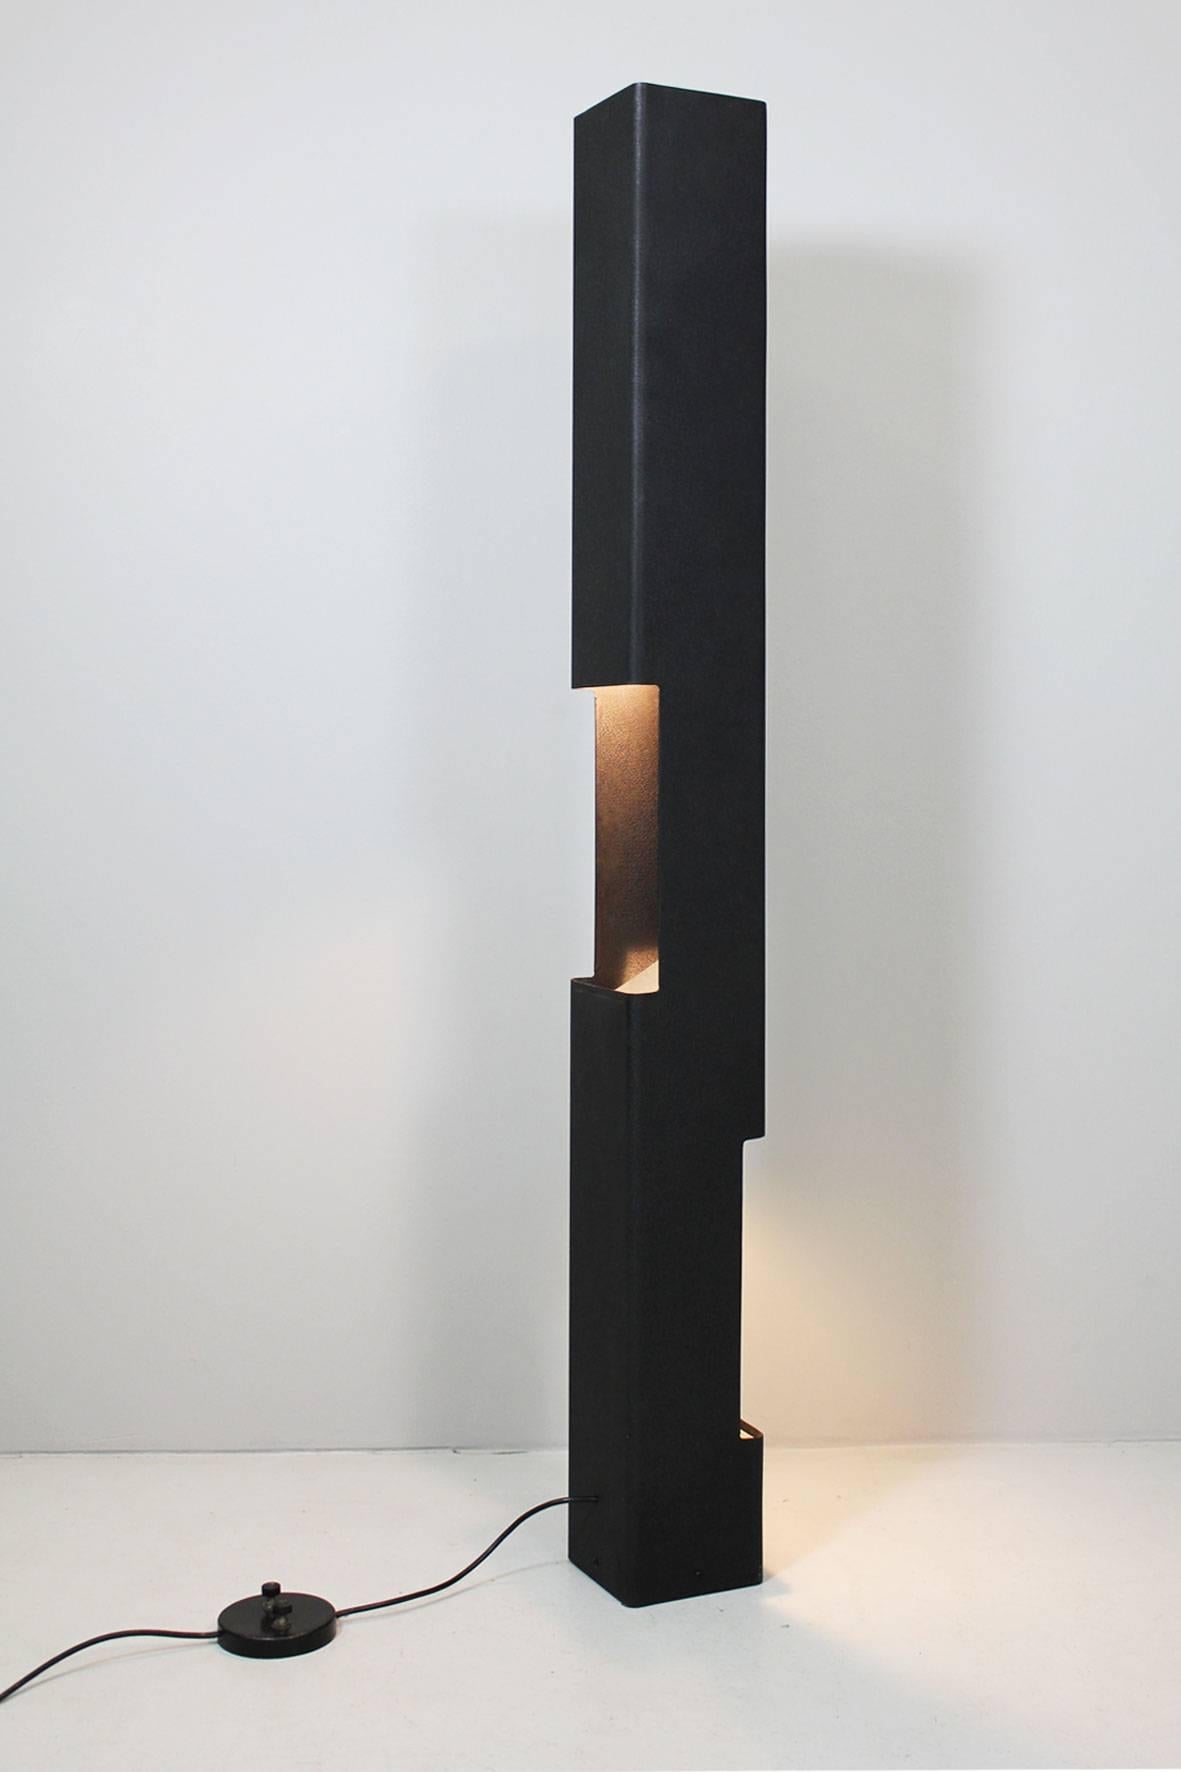 Floor Lamp by Vittoriano Viganò, Arteluce Italy 1960

metal canted & painted black, black textured lacquer,
2 bulbs (top & side)